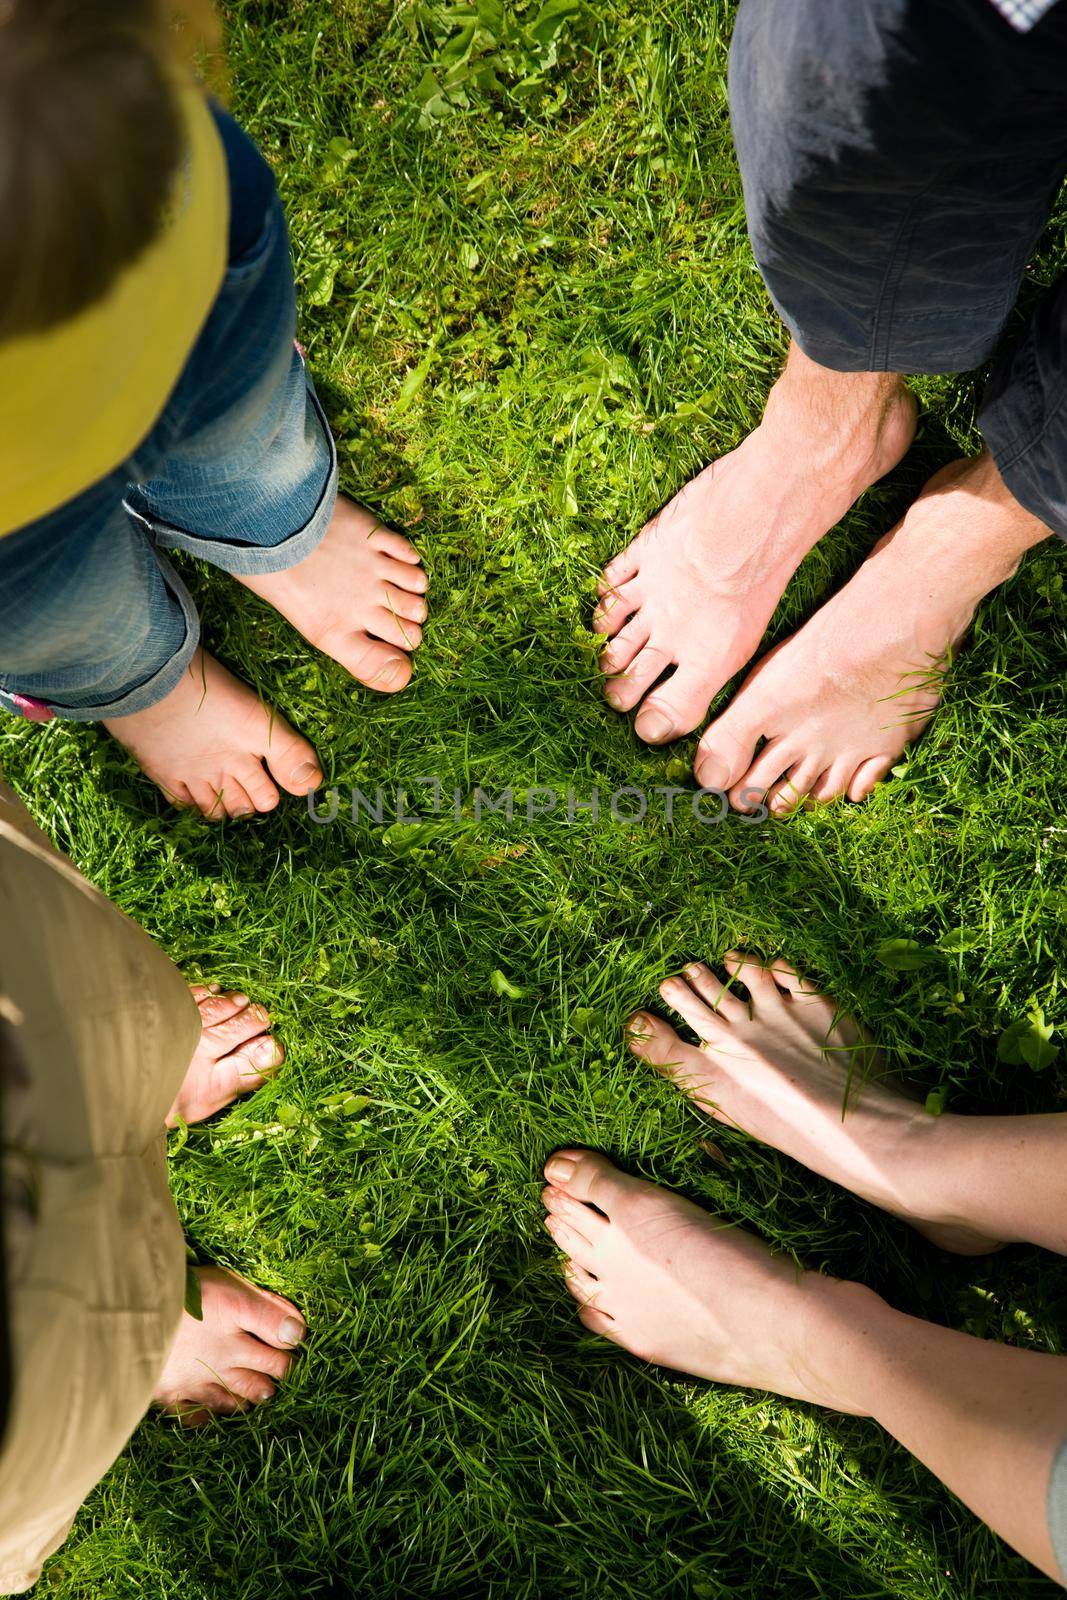 Healthy feet series - feet of men and women of different ages standing in a circle in the grass with daisies, seen from above